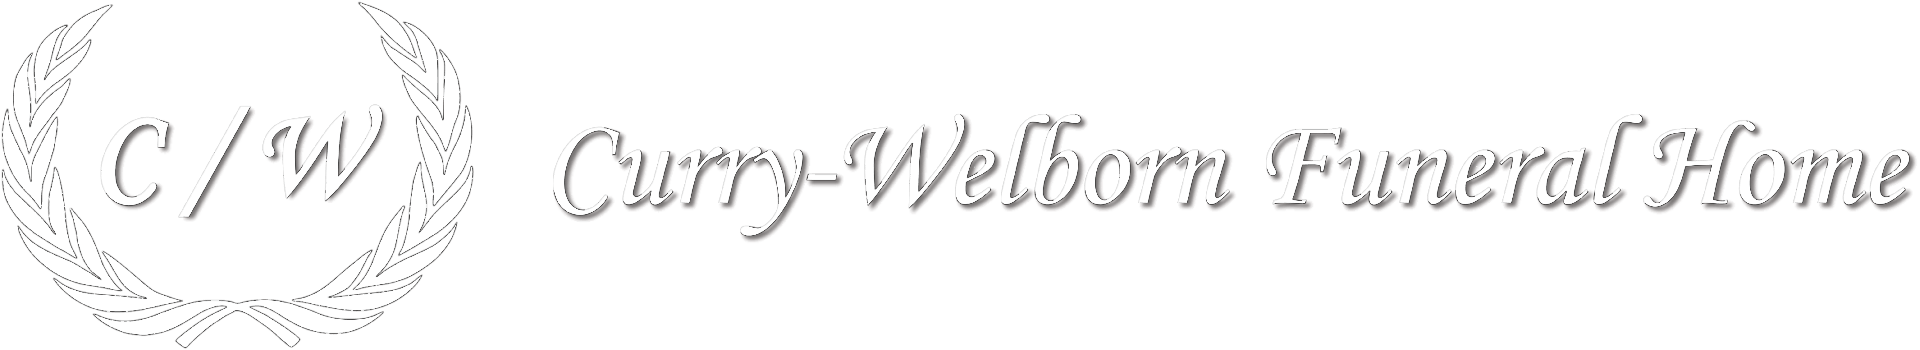 Curry-Welborn Funeral Home Logo